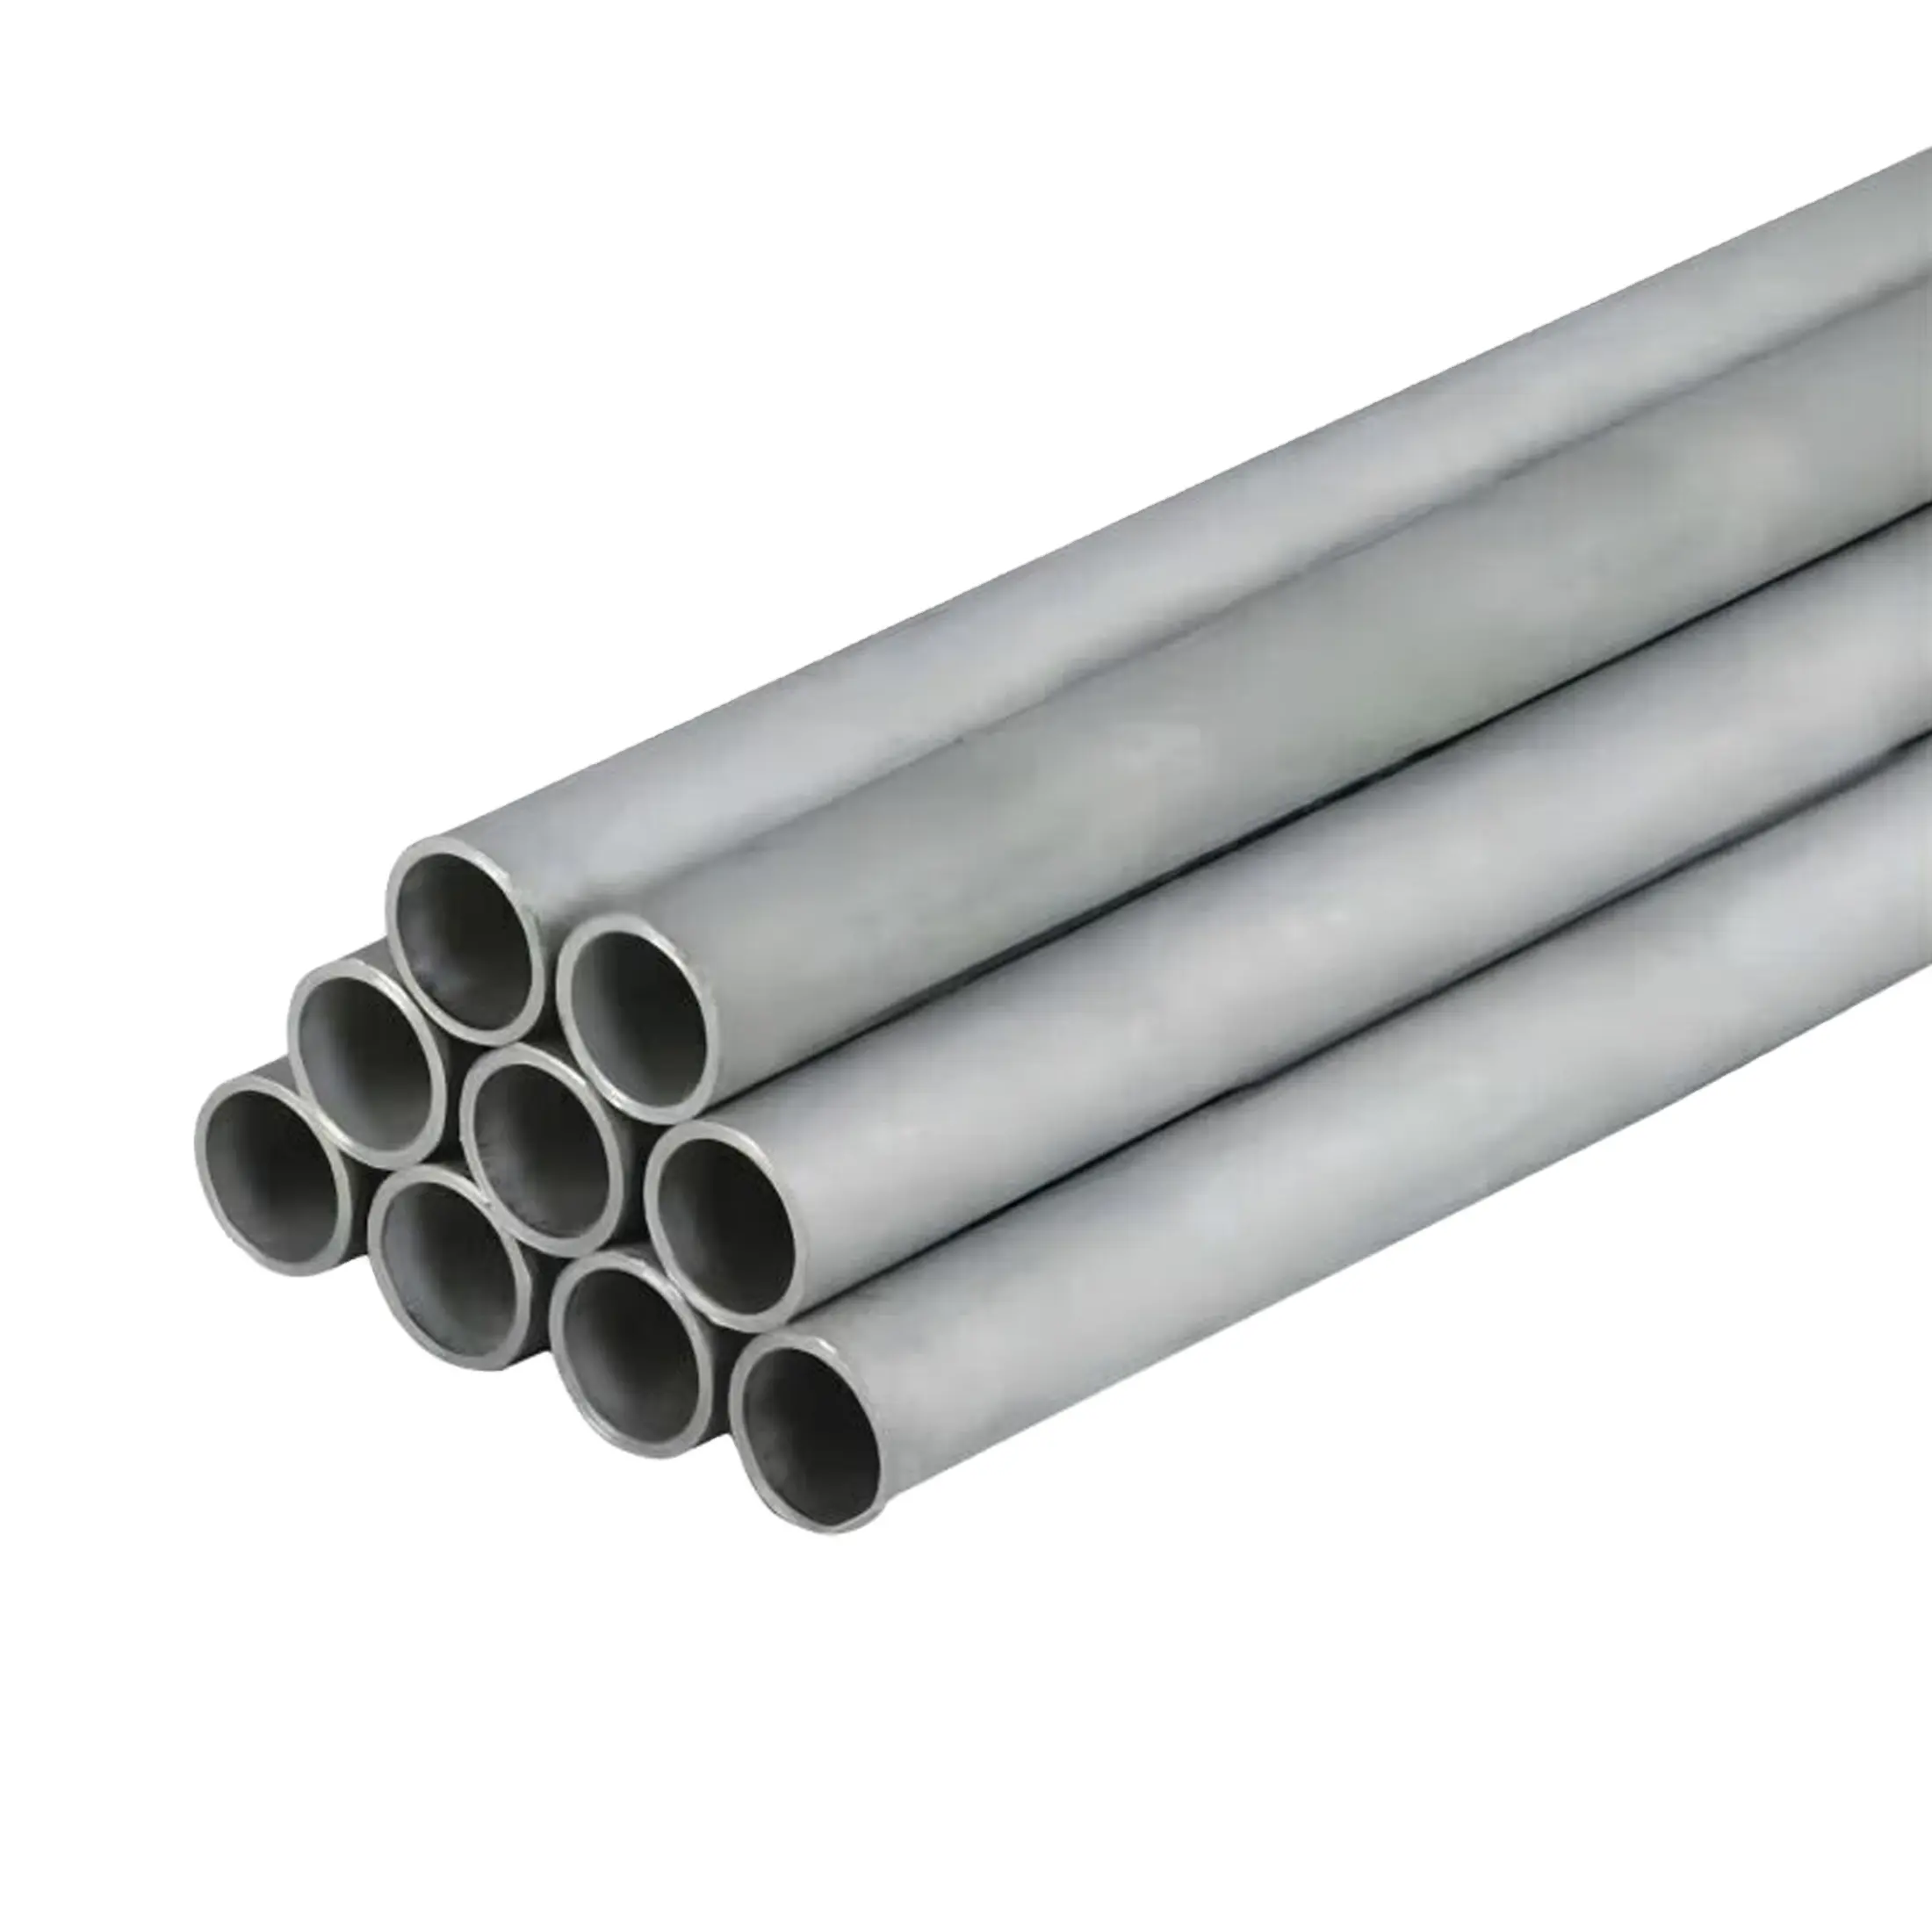 316 AISI 431 SUS Stainless Steel Round Pipe 402 201 304L 316L 410s 430 20mm 9mm Stainless Steel Tube